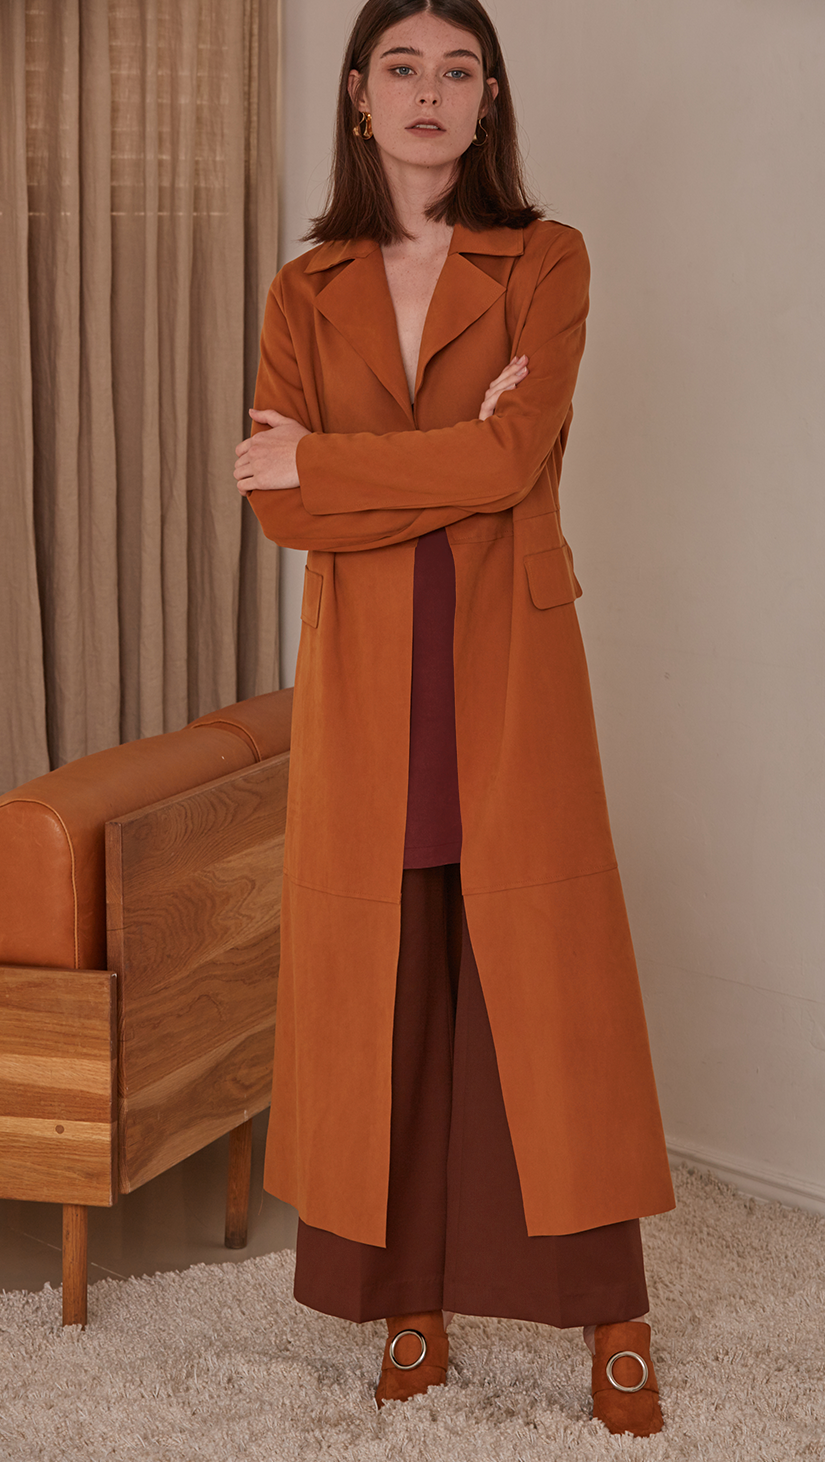 Vegan suede robe coat with tie in camel. No hardware, centre front tie closure. Pointed lapel collar and two oversize slip pockets at natural waist. Super soft suede feel. Straight hem. Designed to skim the body and have a dropped shoulder seam.